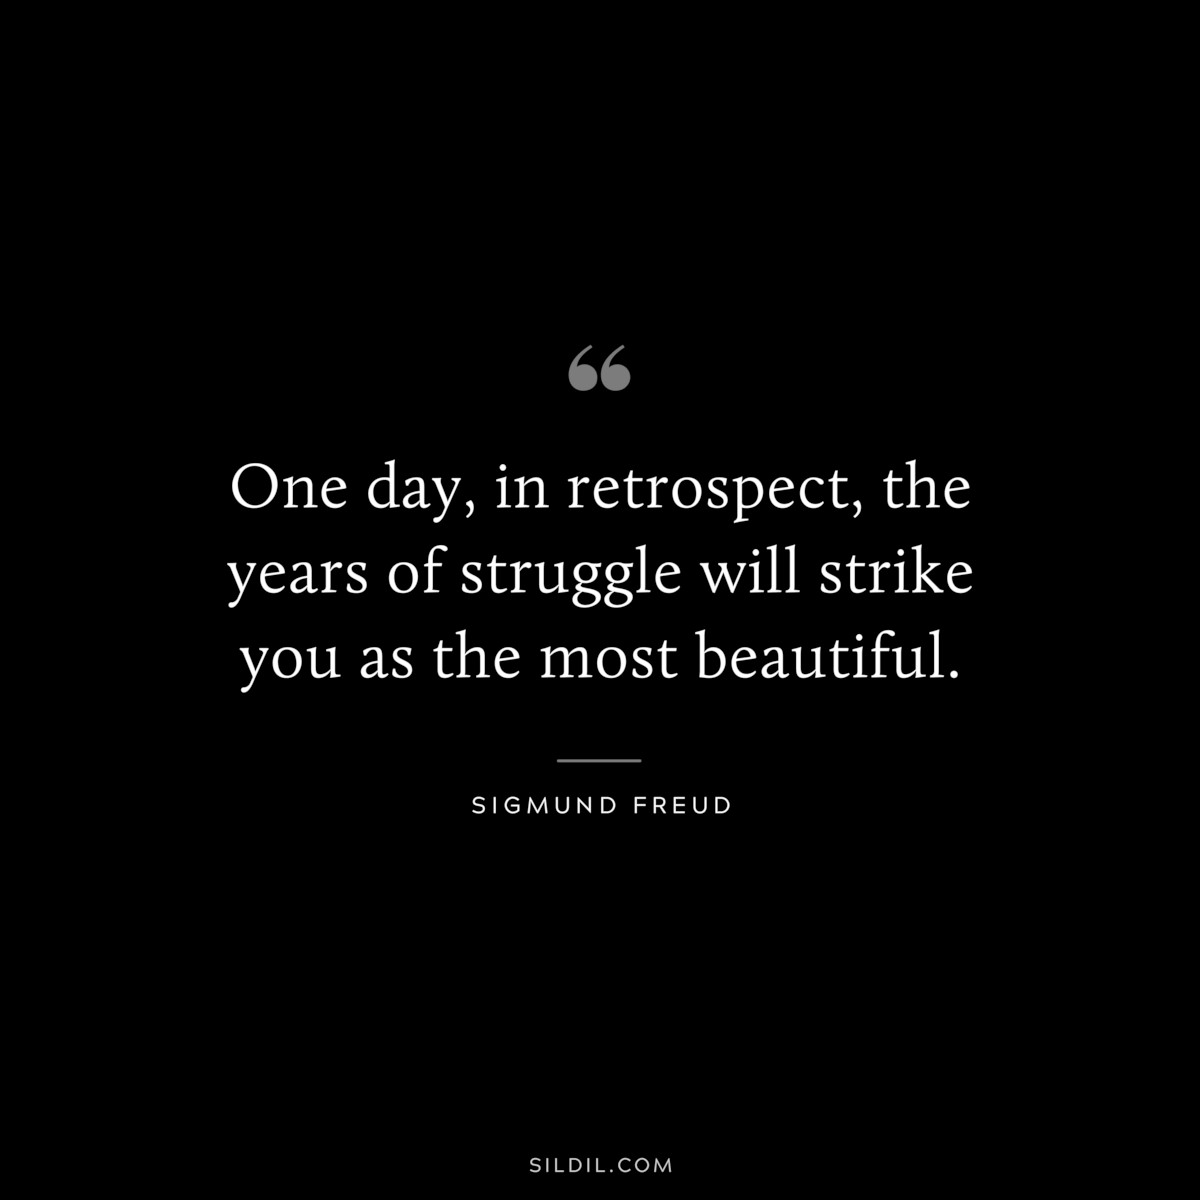 One day, in retrospect, the years of struggle will strike you as the most beautiful. ― Sigmund Frued